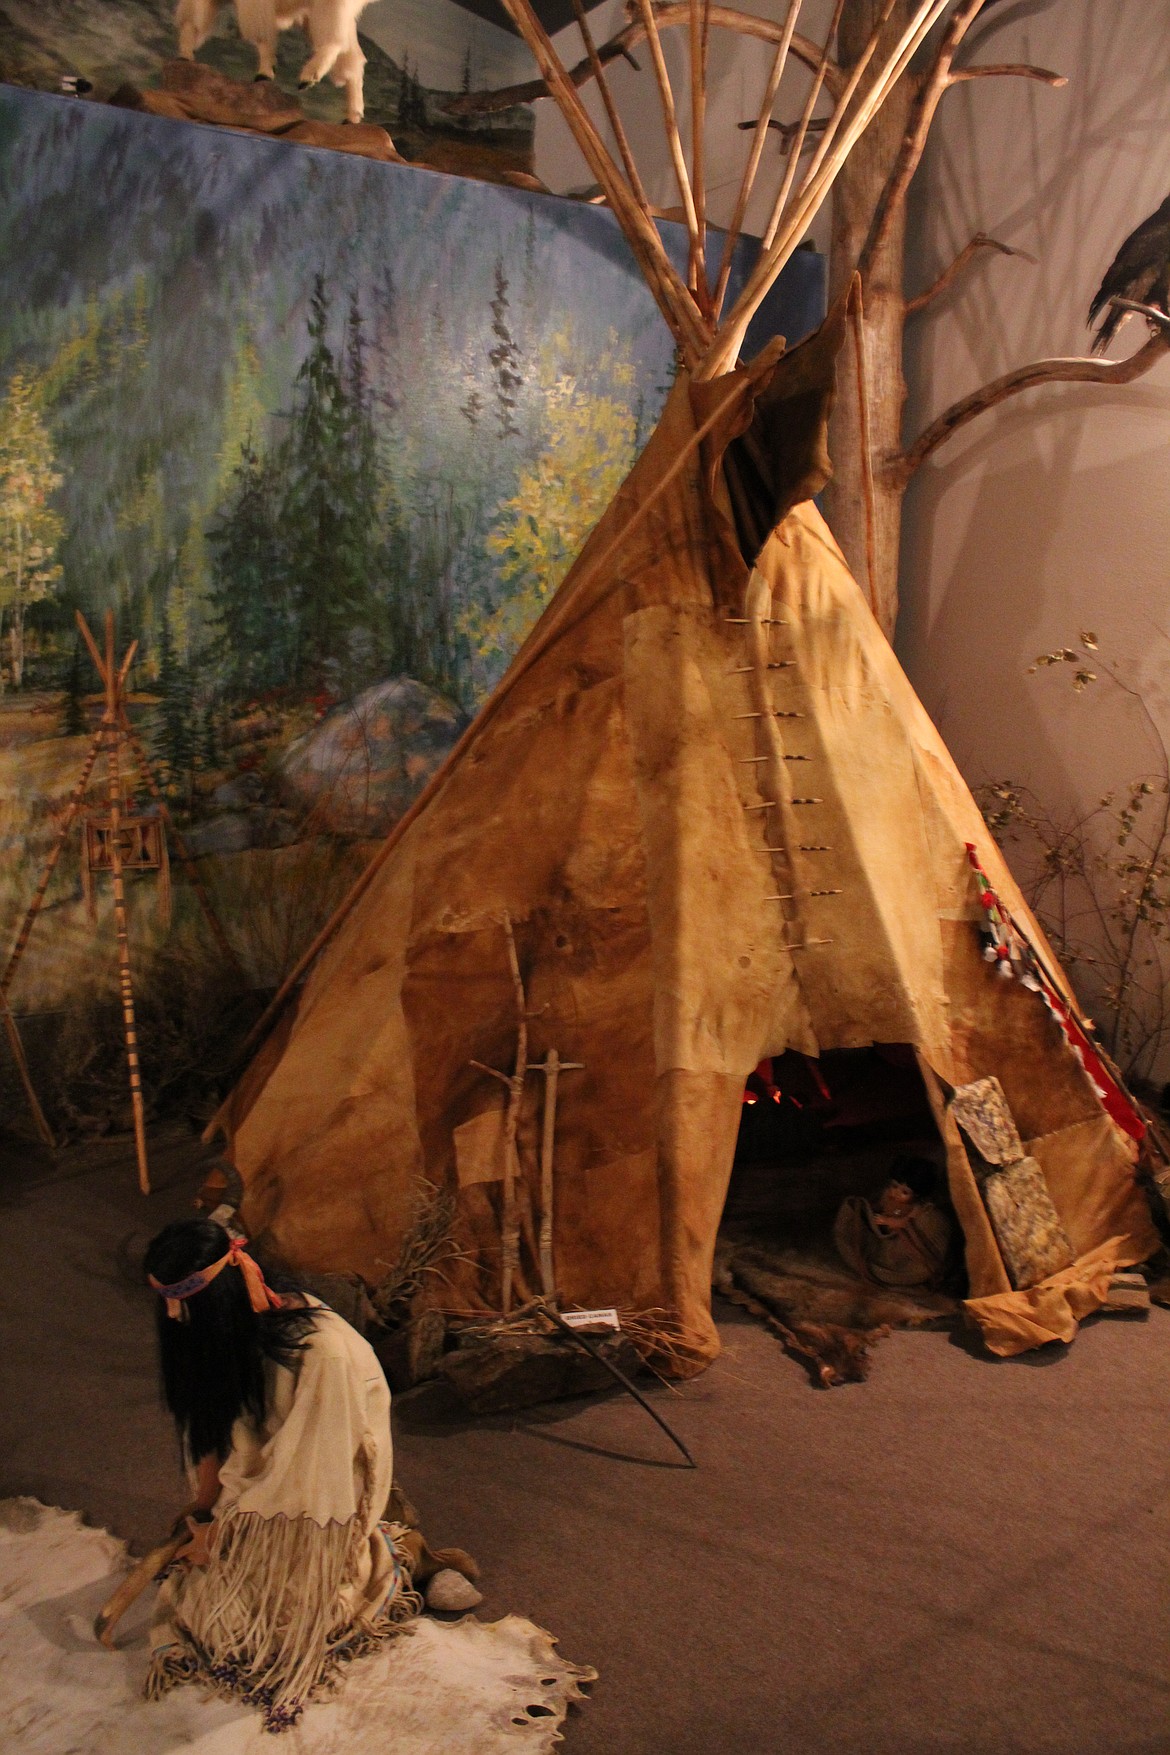 One large hall in the Ninepipes Museum features a life-sized diorama that includes an example of a Native American encampment and full-sized mounts of animals such as moose, elk, deer, bison and mountain goats.